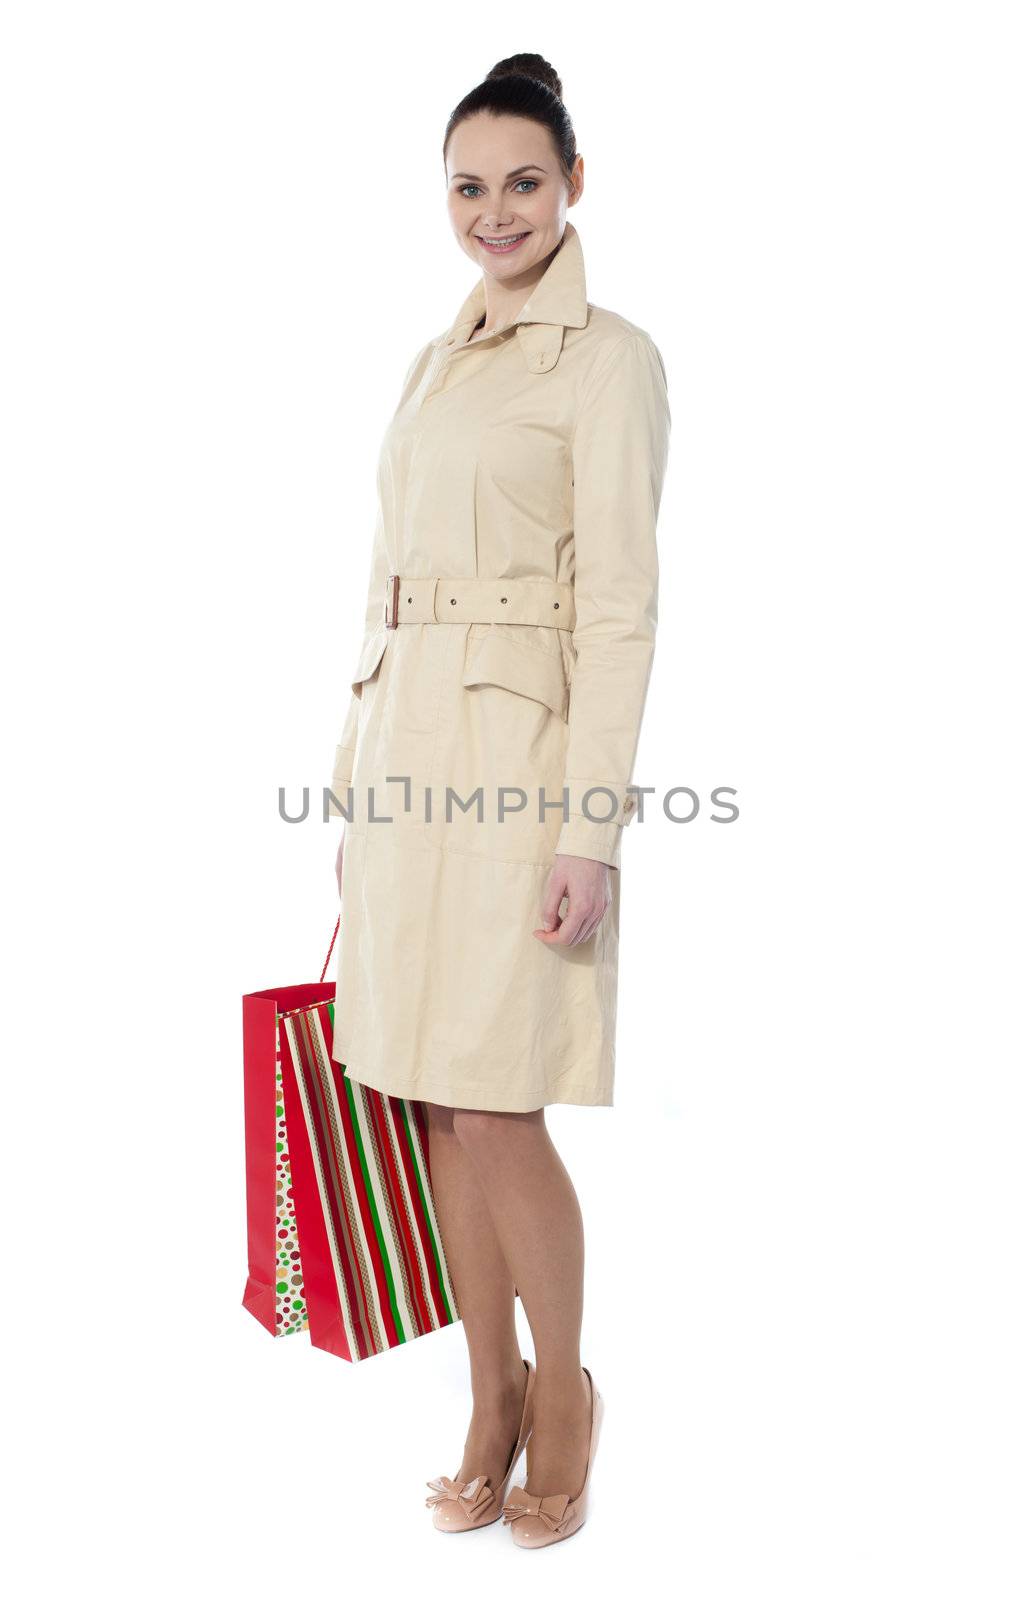 Lovely woman with shopping bags by stockyimages